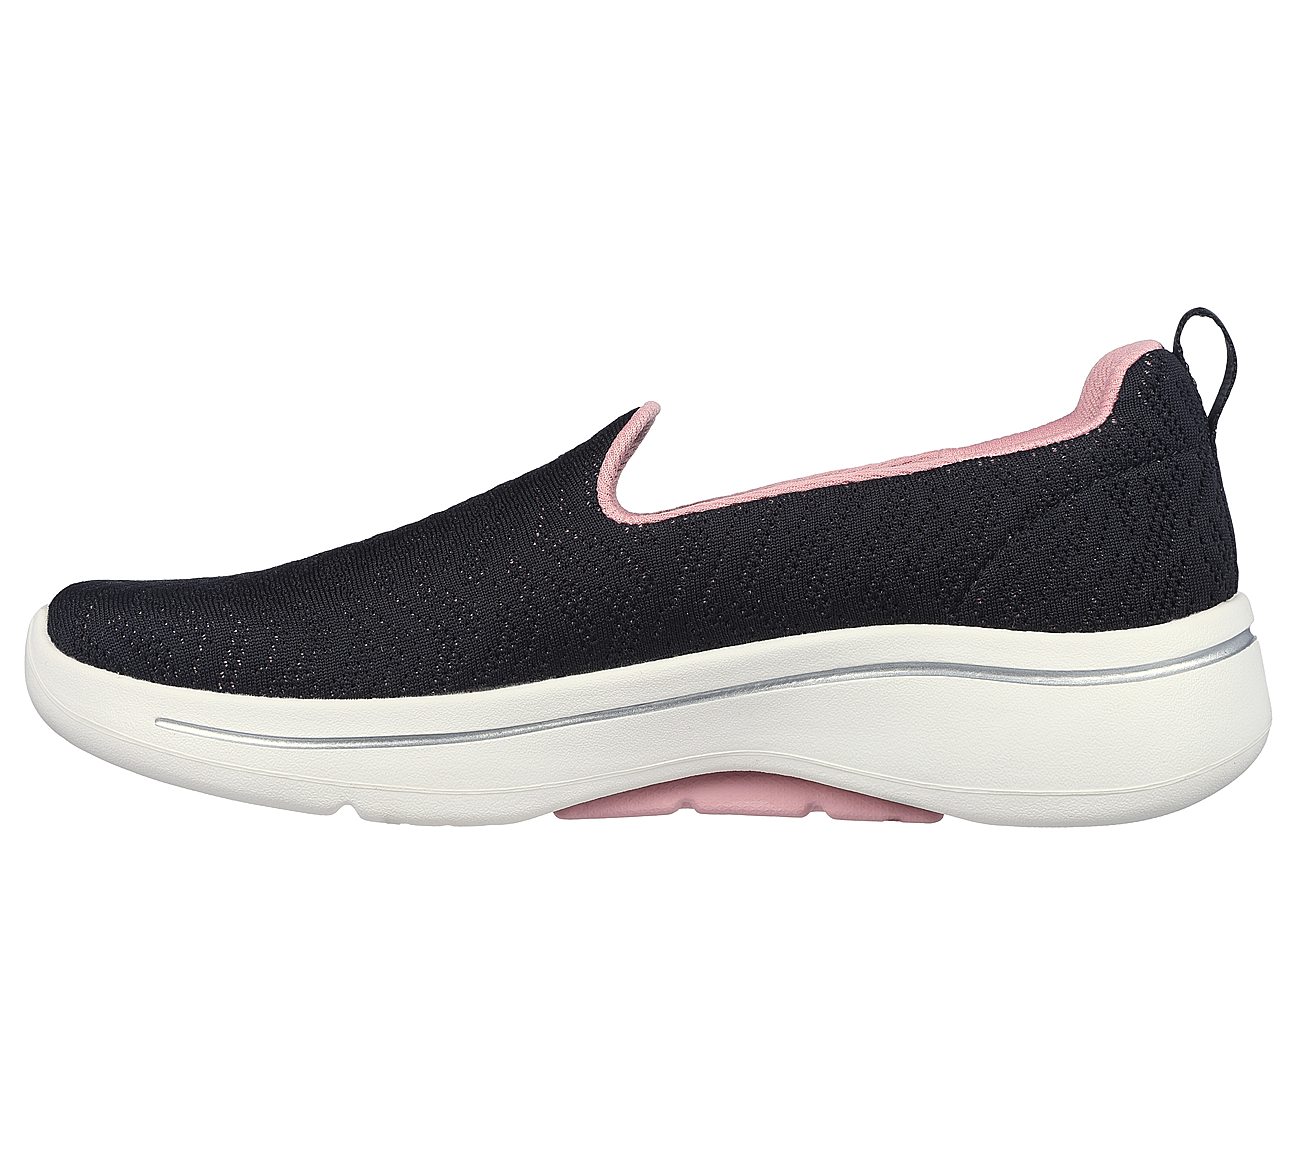 Skechers Black/Pink Go Walk-Arch-Fit-O Womens Slip On Shoes - Style ID ...